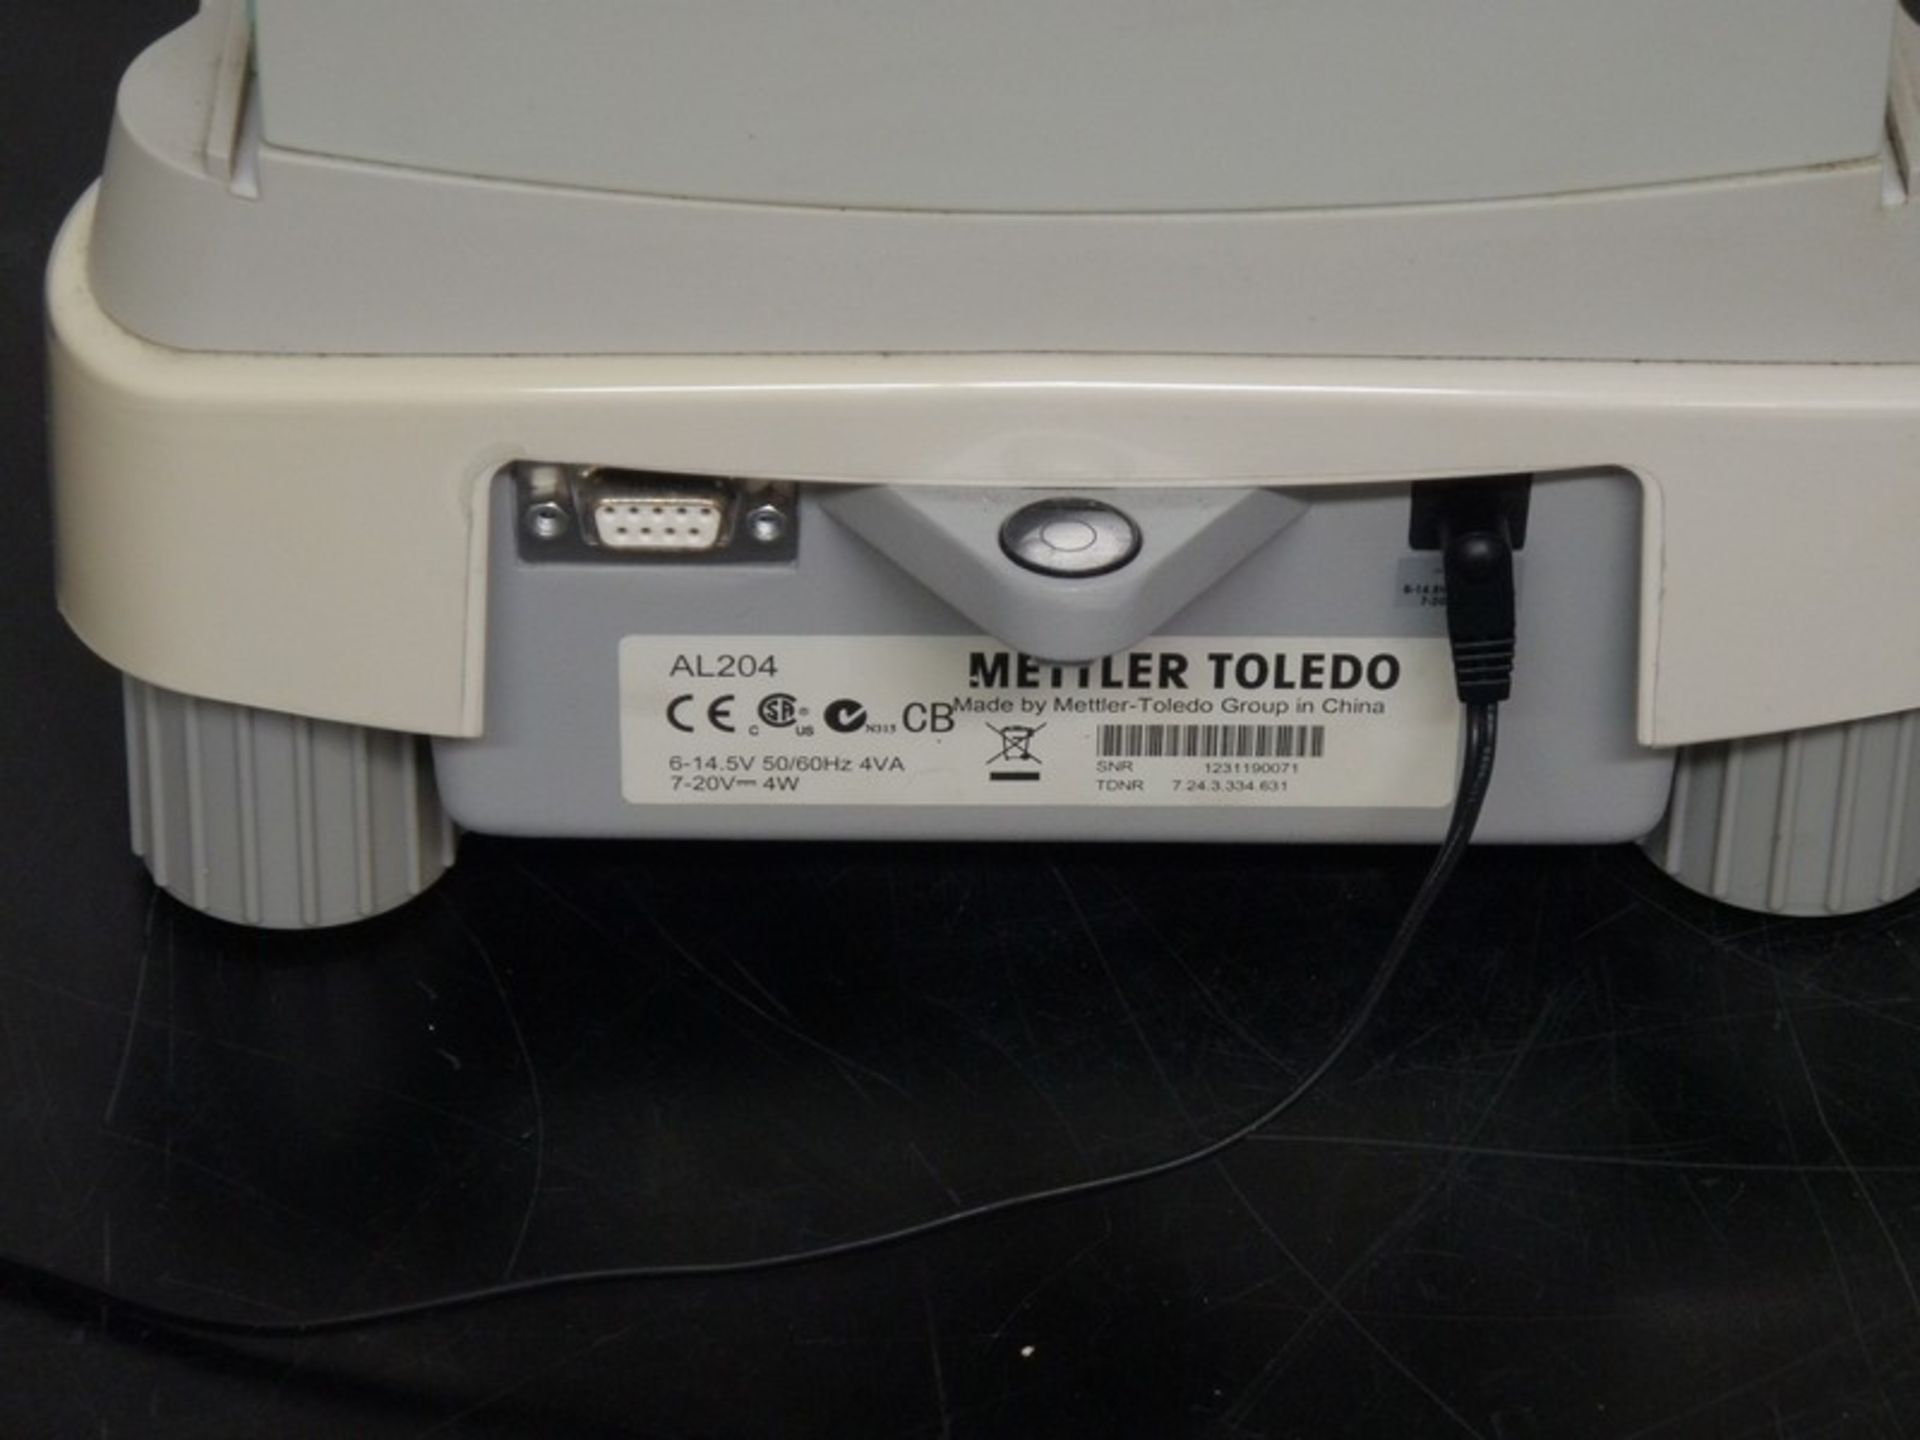 Mettler Toledo Analytical Balance, Model AL204, S/N 1231190071, Includes Power Cord (NOTE: Balance - Image 9 of 9